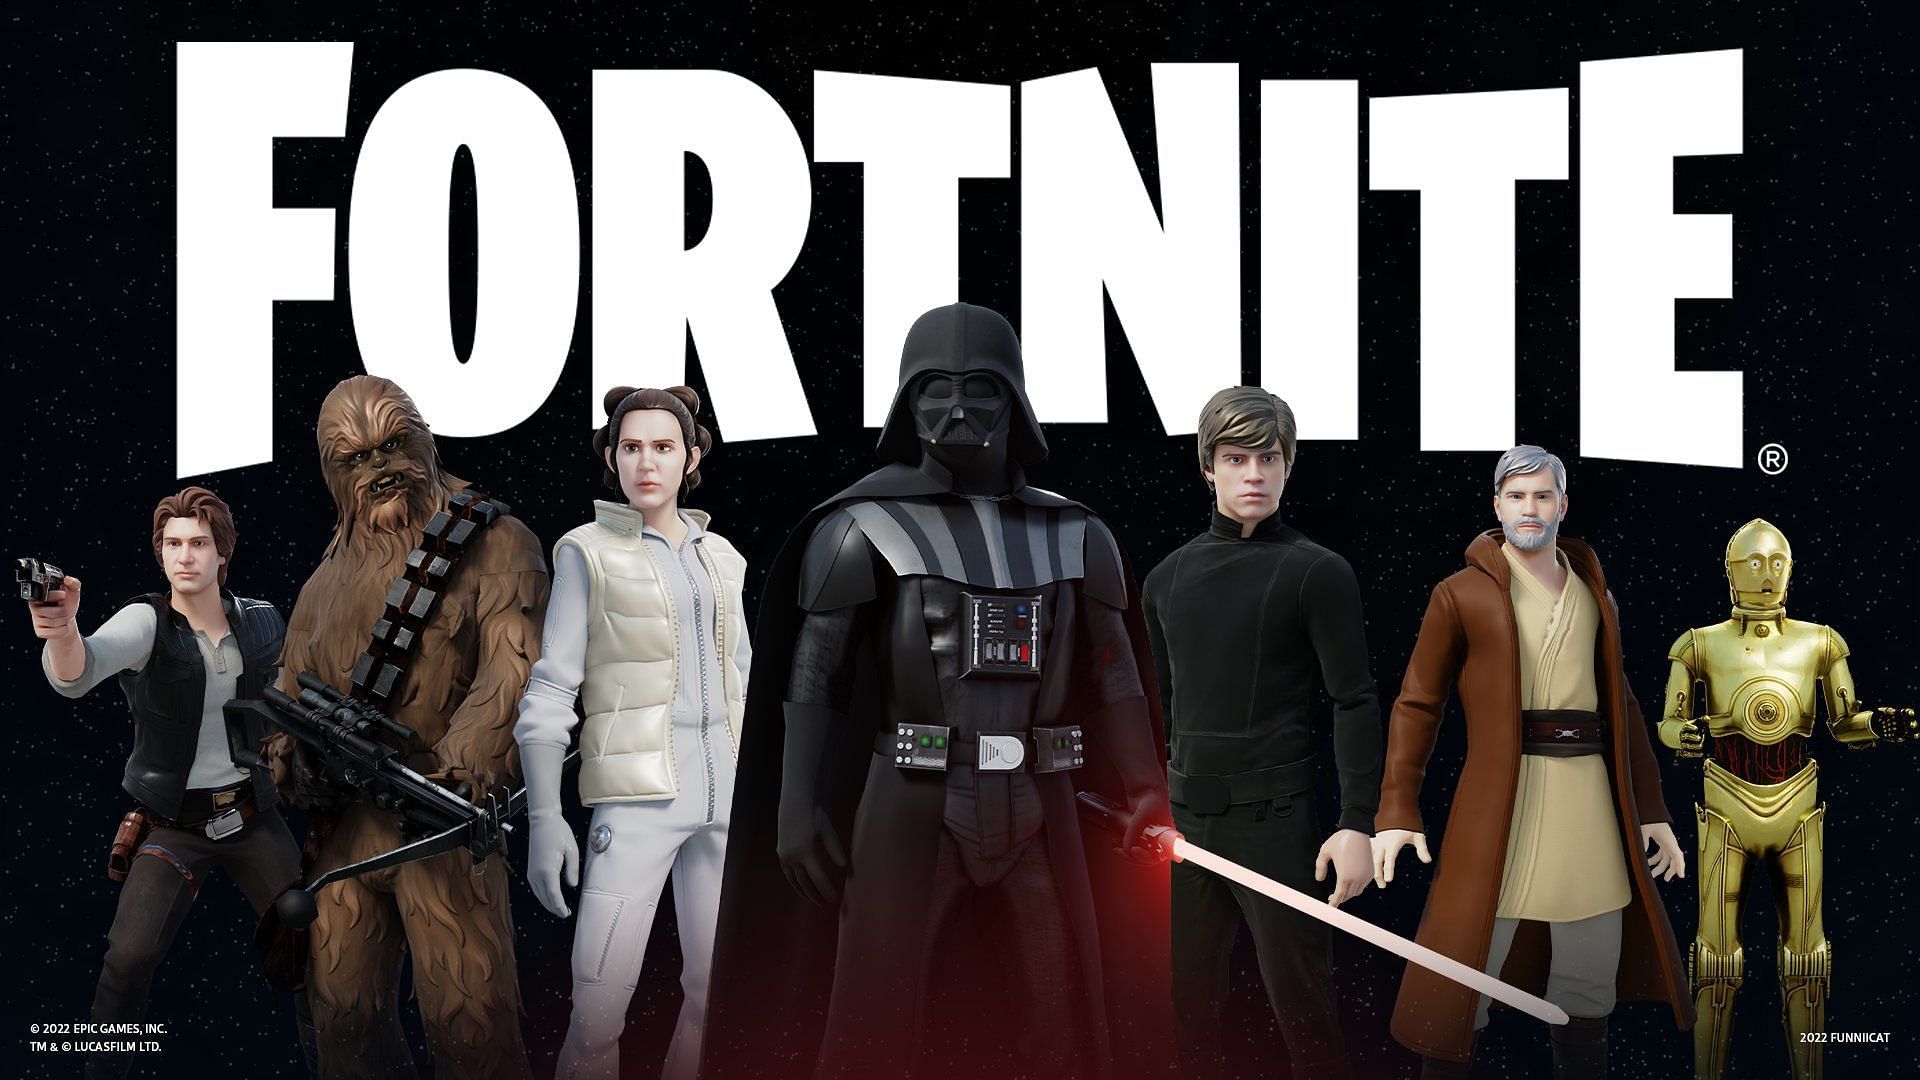 Darth Vader and other Star Wars characters in Fortnite Chapter 3 Season 3 (Image via funniicat/Twitter)